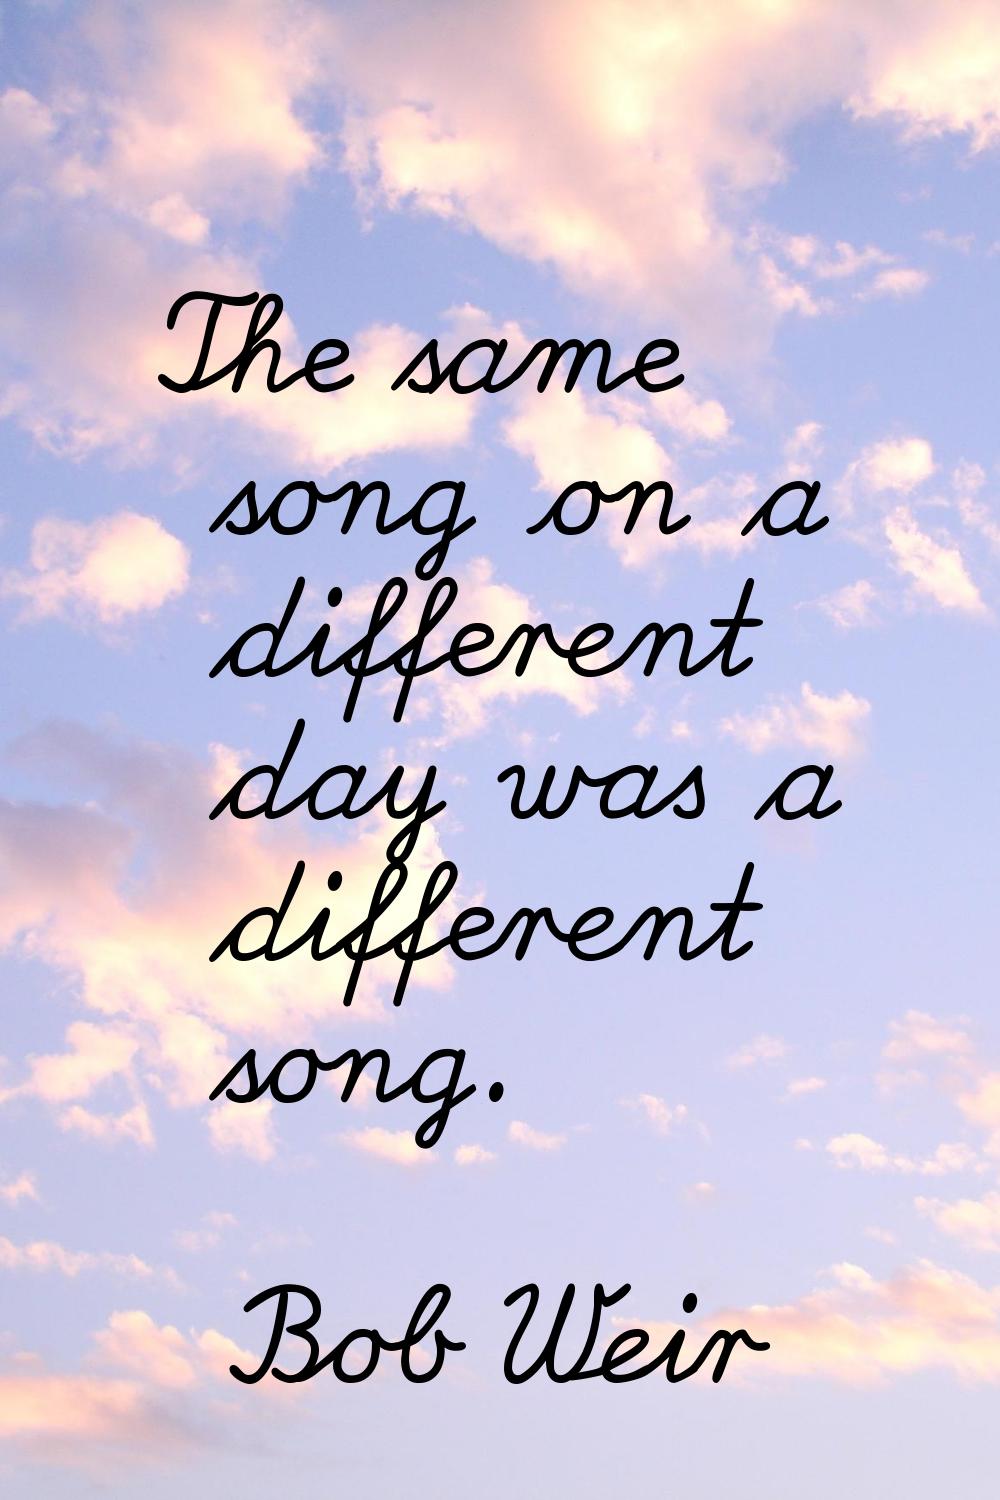 The same song on a different day was a different song.